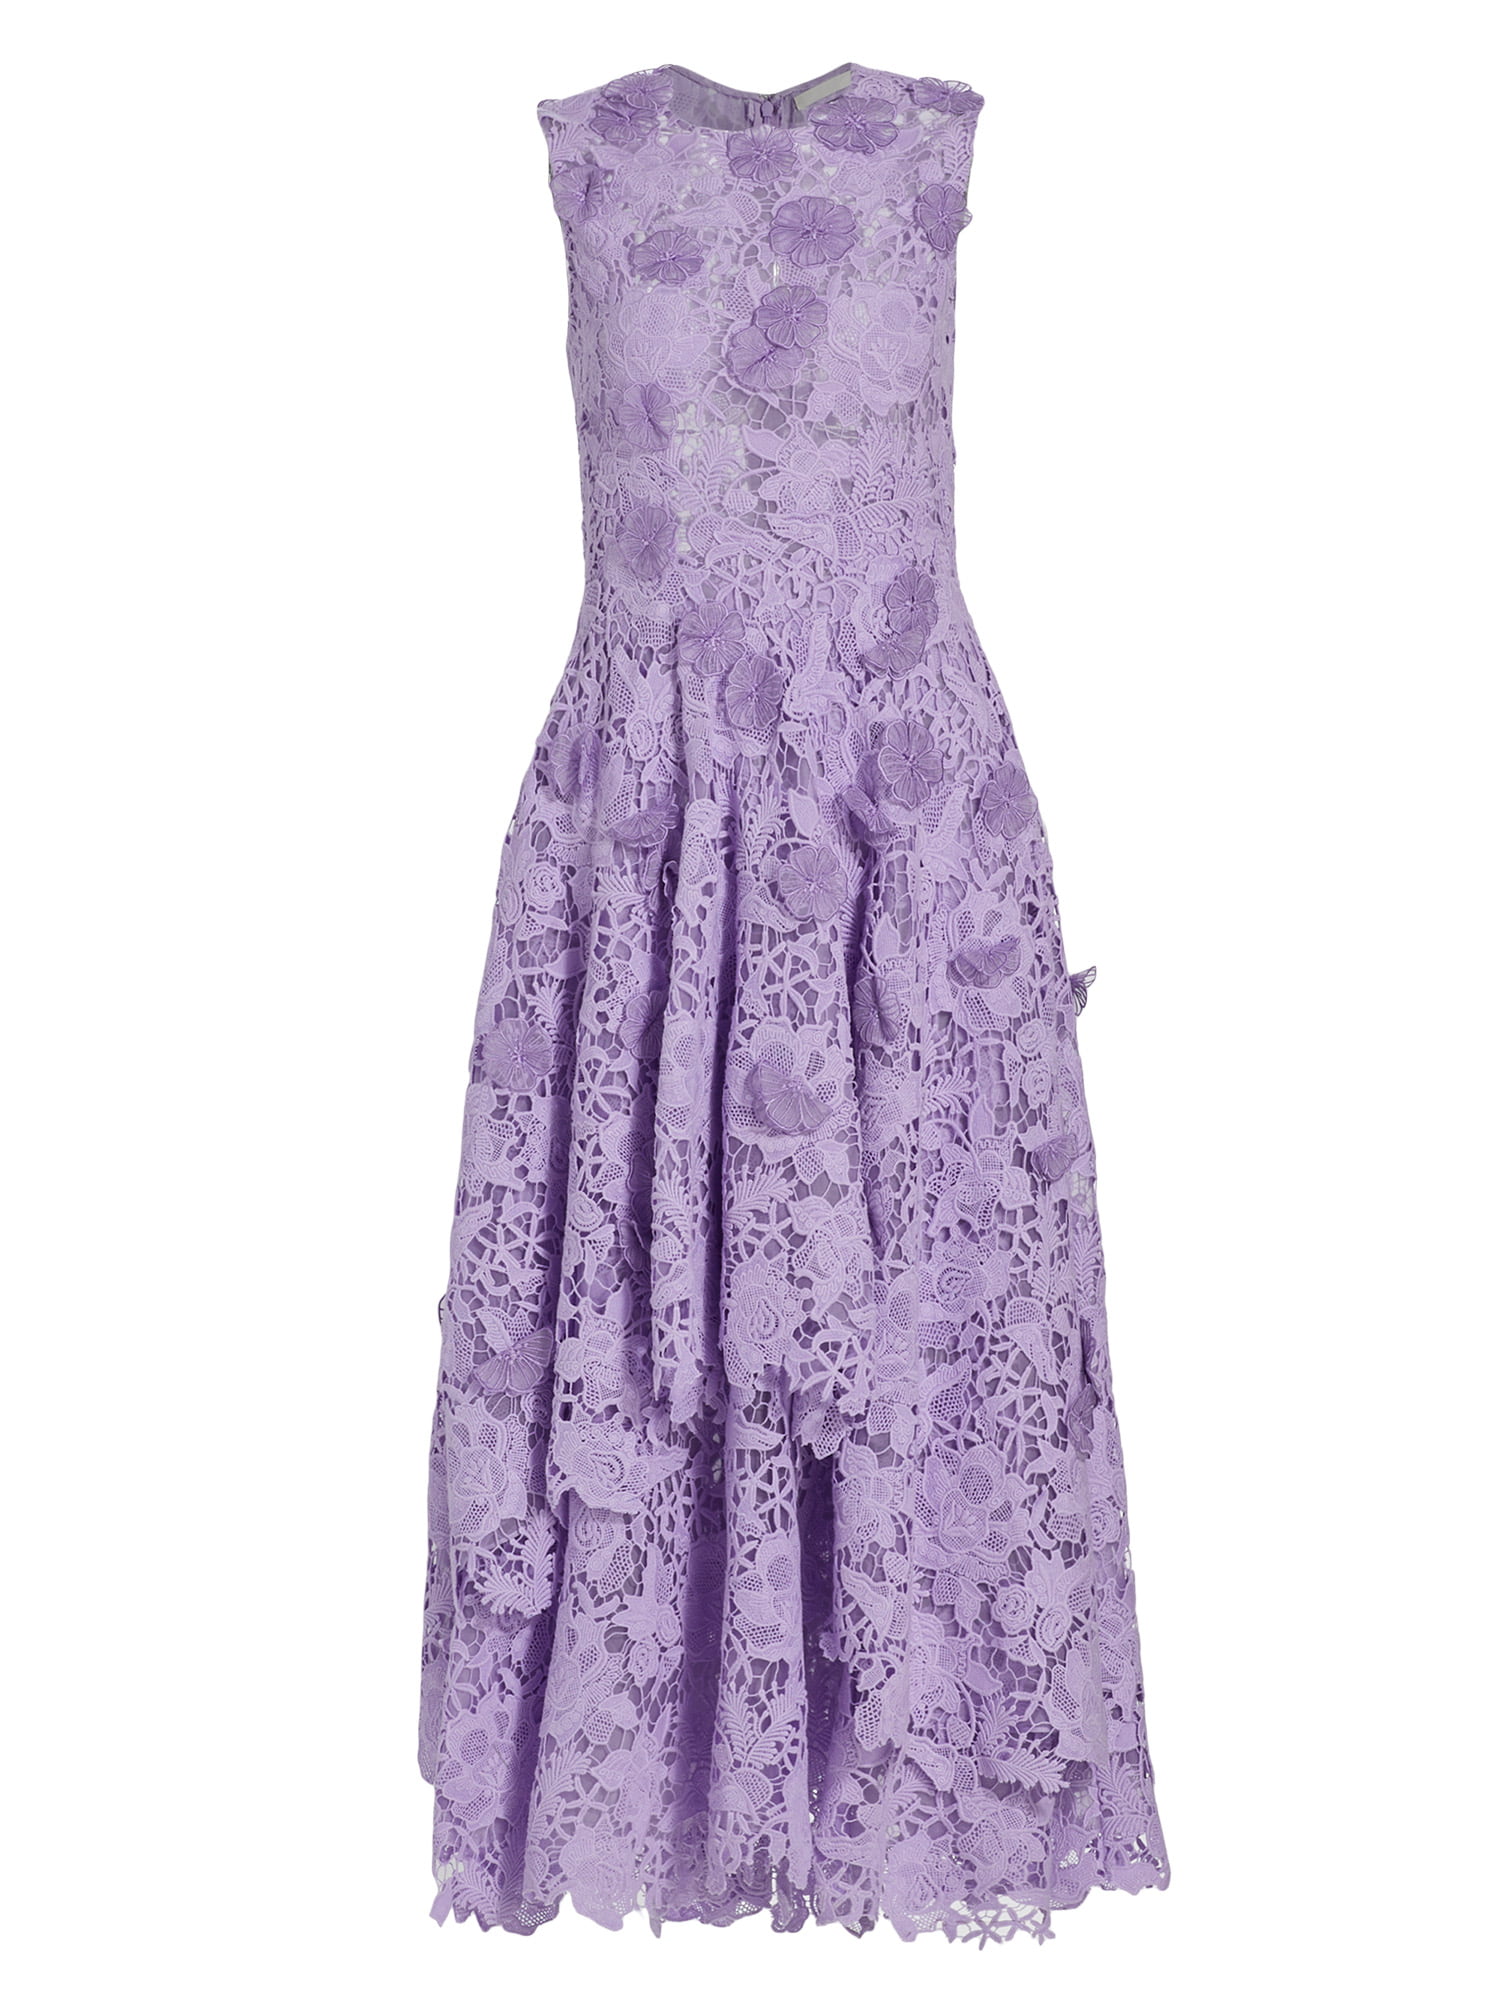 Jason Wu Collection Floral Guipure Sleeveless Lace Dress